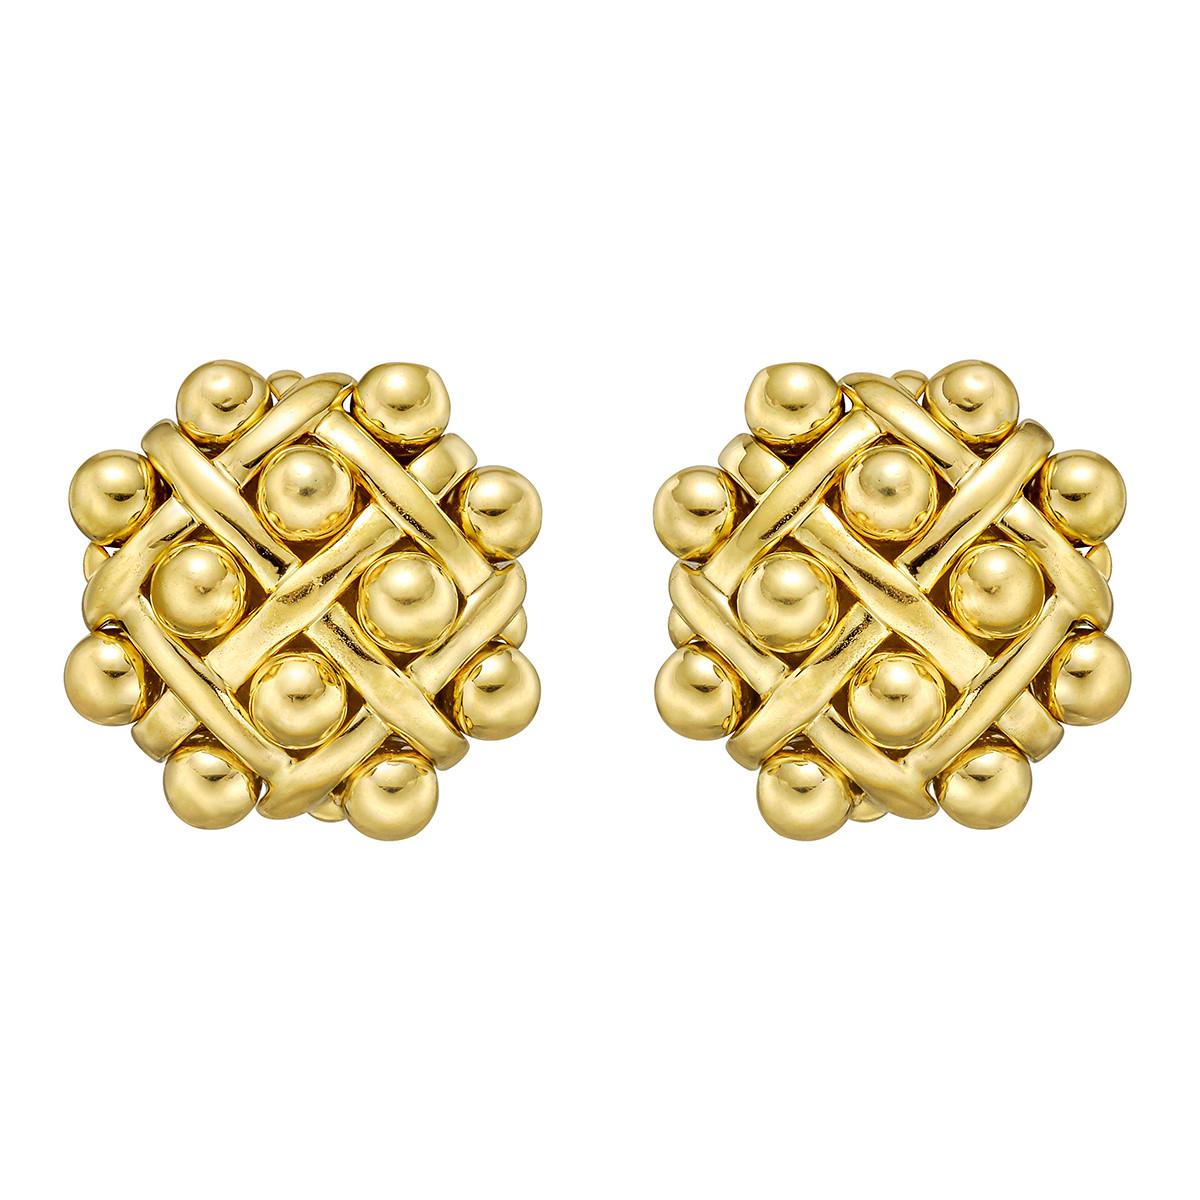 A magnificent pair of authentic Chanel earrings showcasing a quilted pattern in shimmering 18k yellow gold. The earrings have clip on backs and have the option for pierced ears as well.